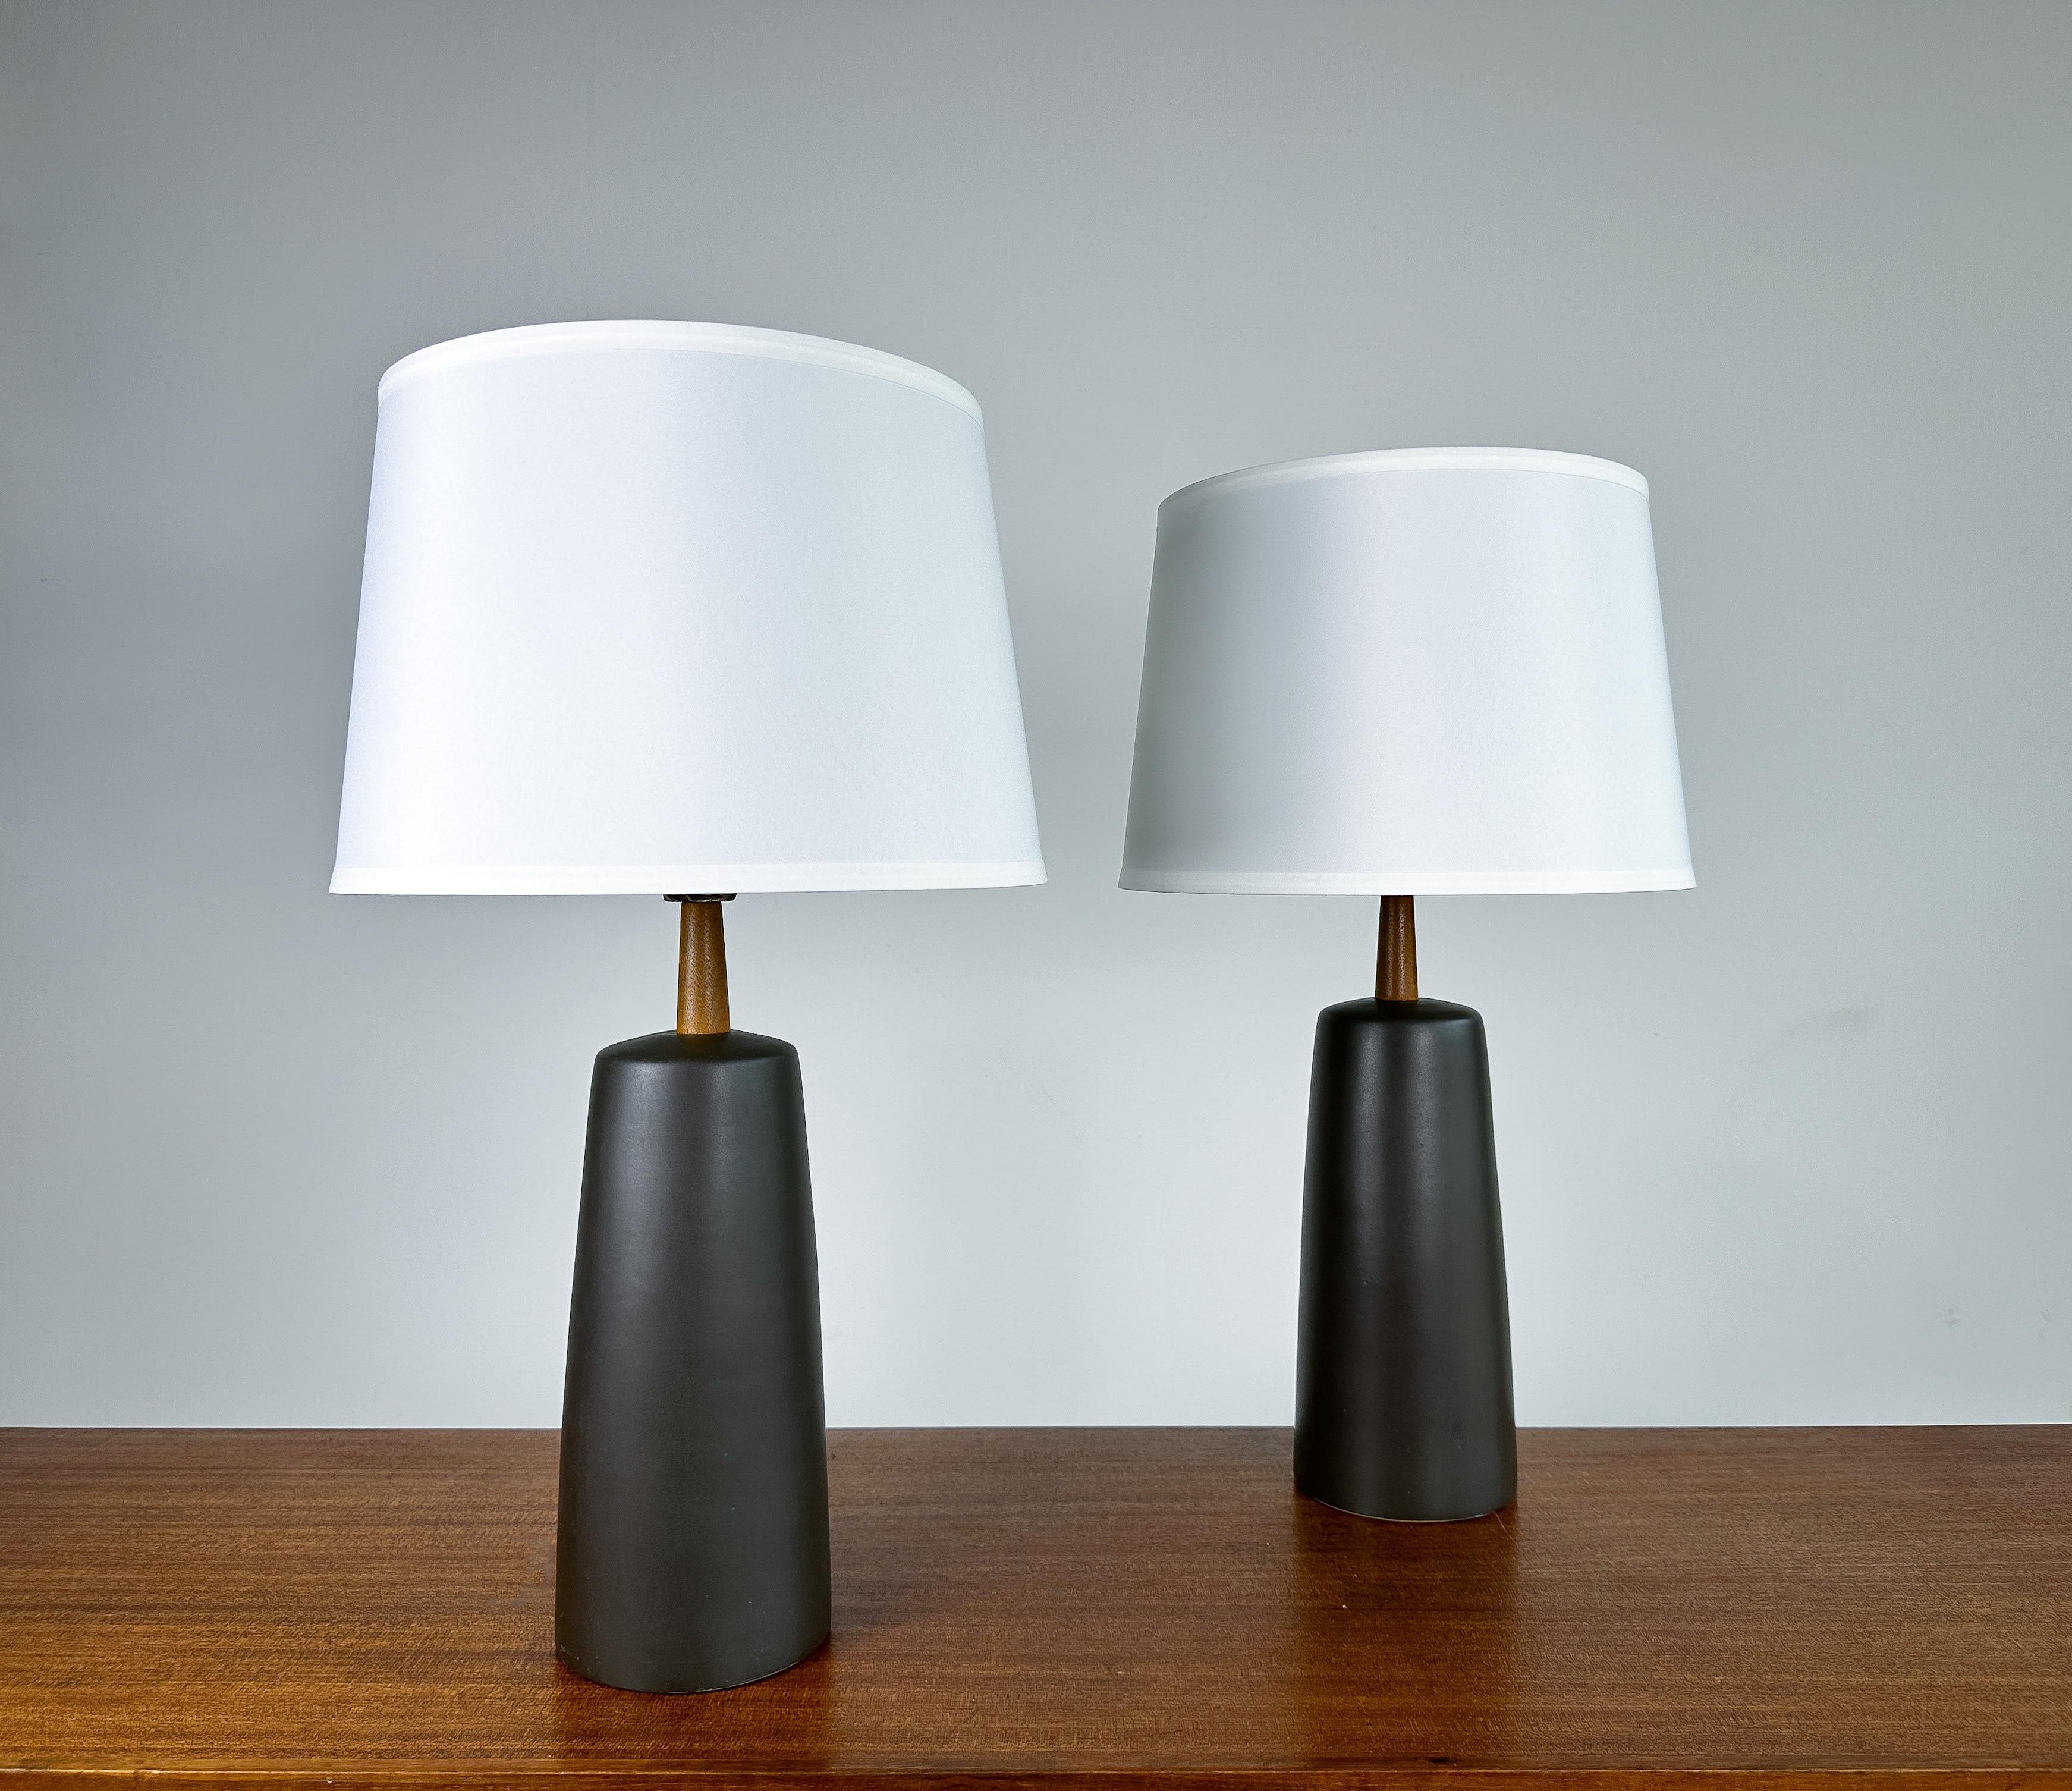 American Martz Glazed Ceramic Table Lamps, Marshall Studios, 1960s, a Pair For Sale